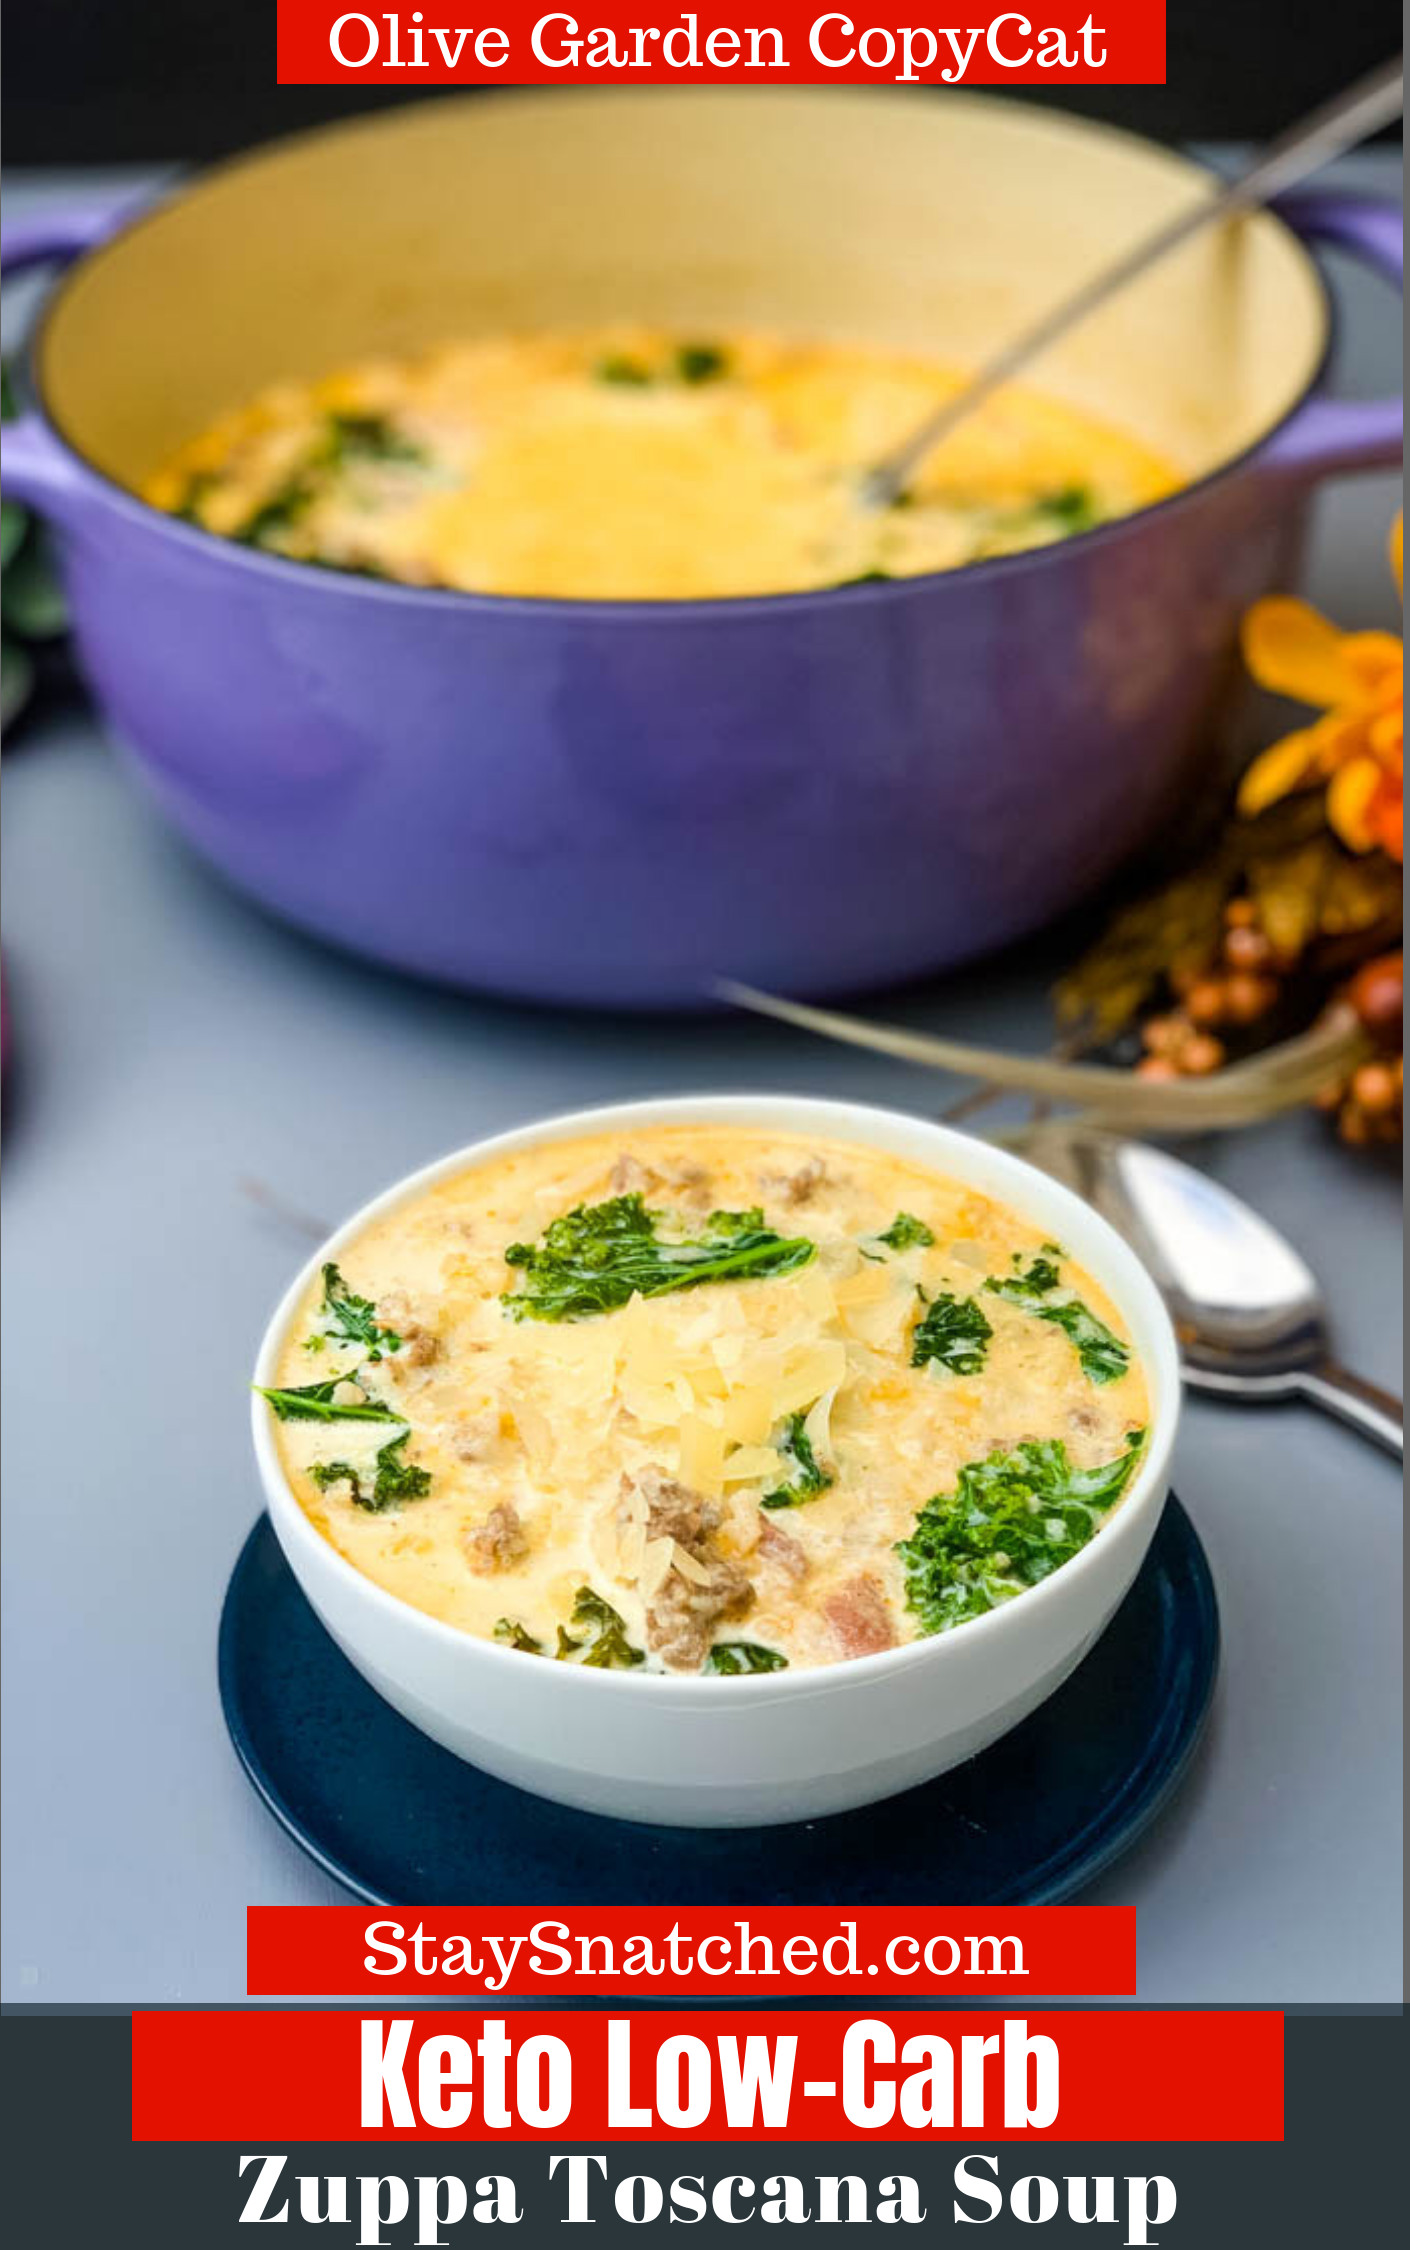 Crockpot Keto Zuppa Toscana
 Easy Keto Low Carb Zuppa Toscana Soup is the best Olive